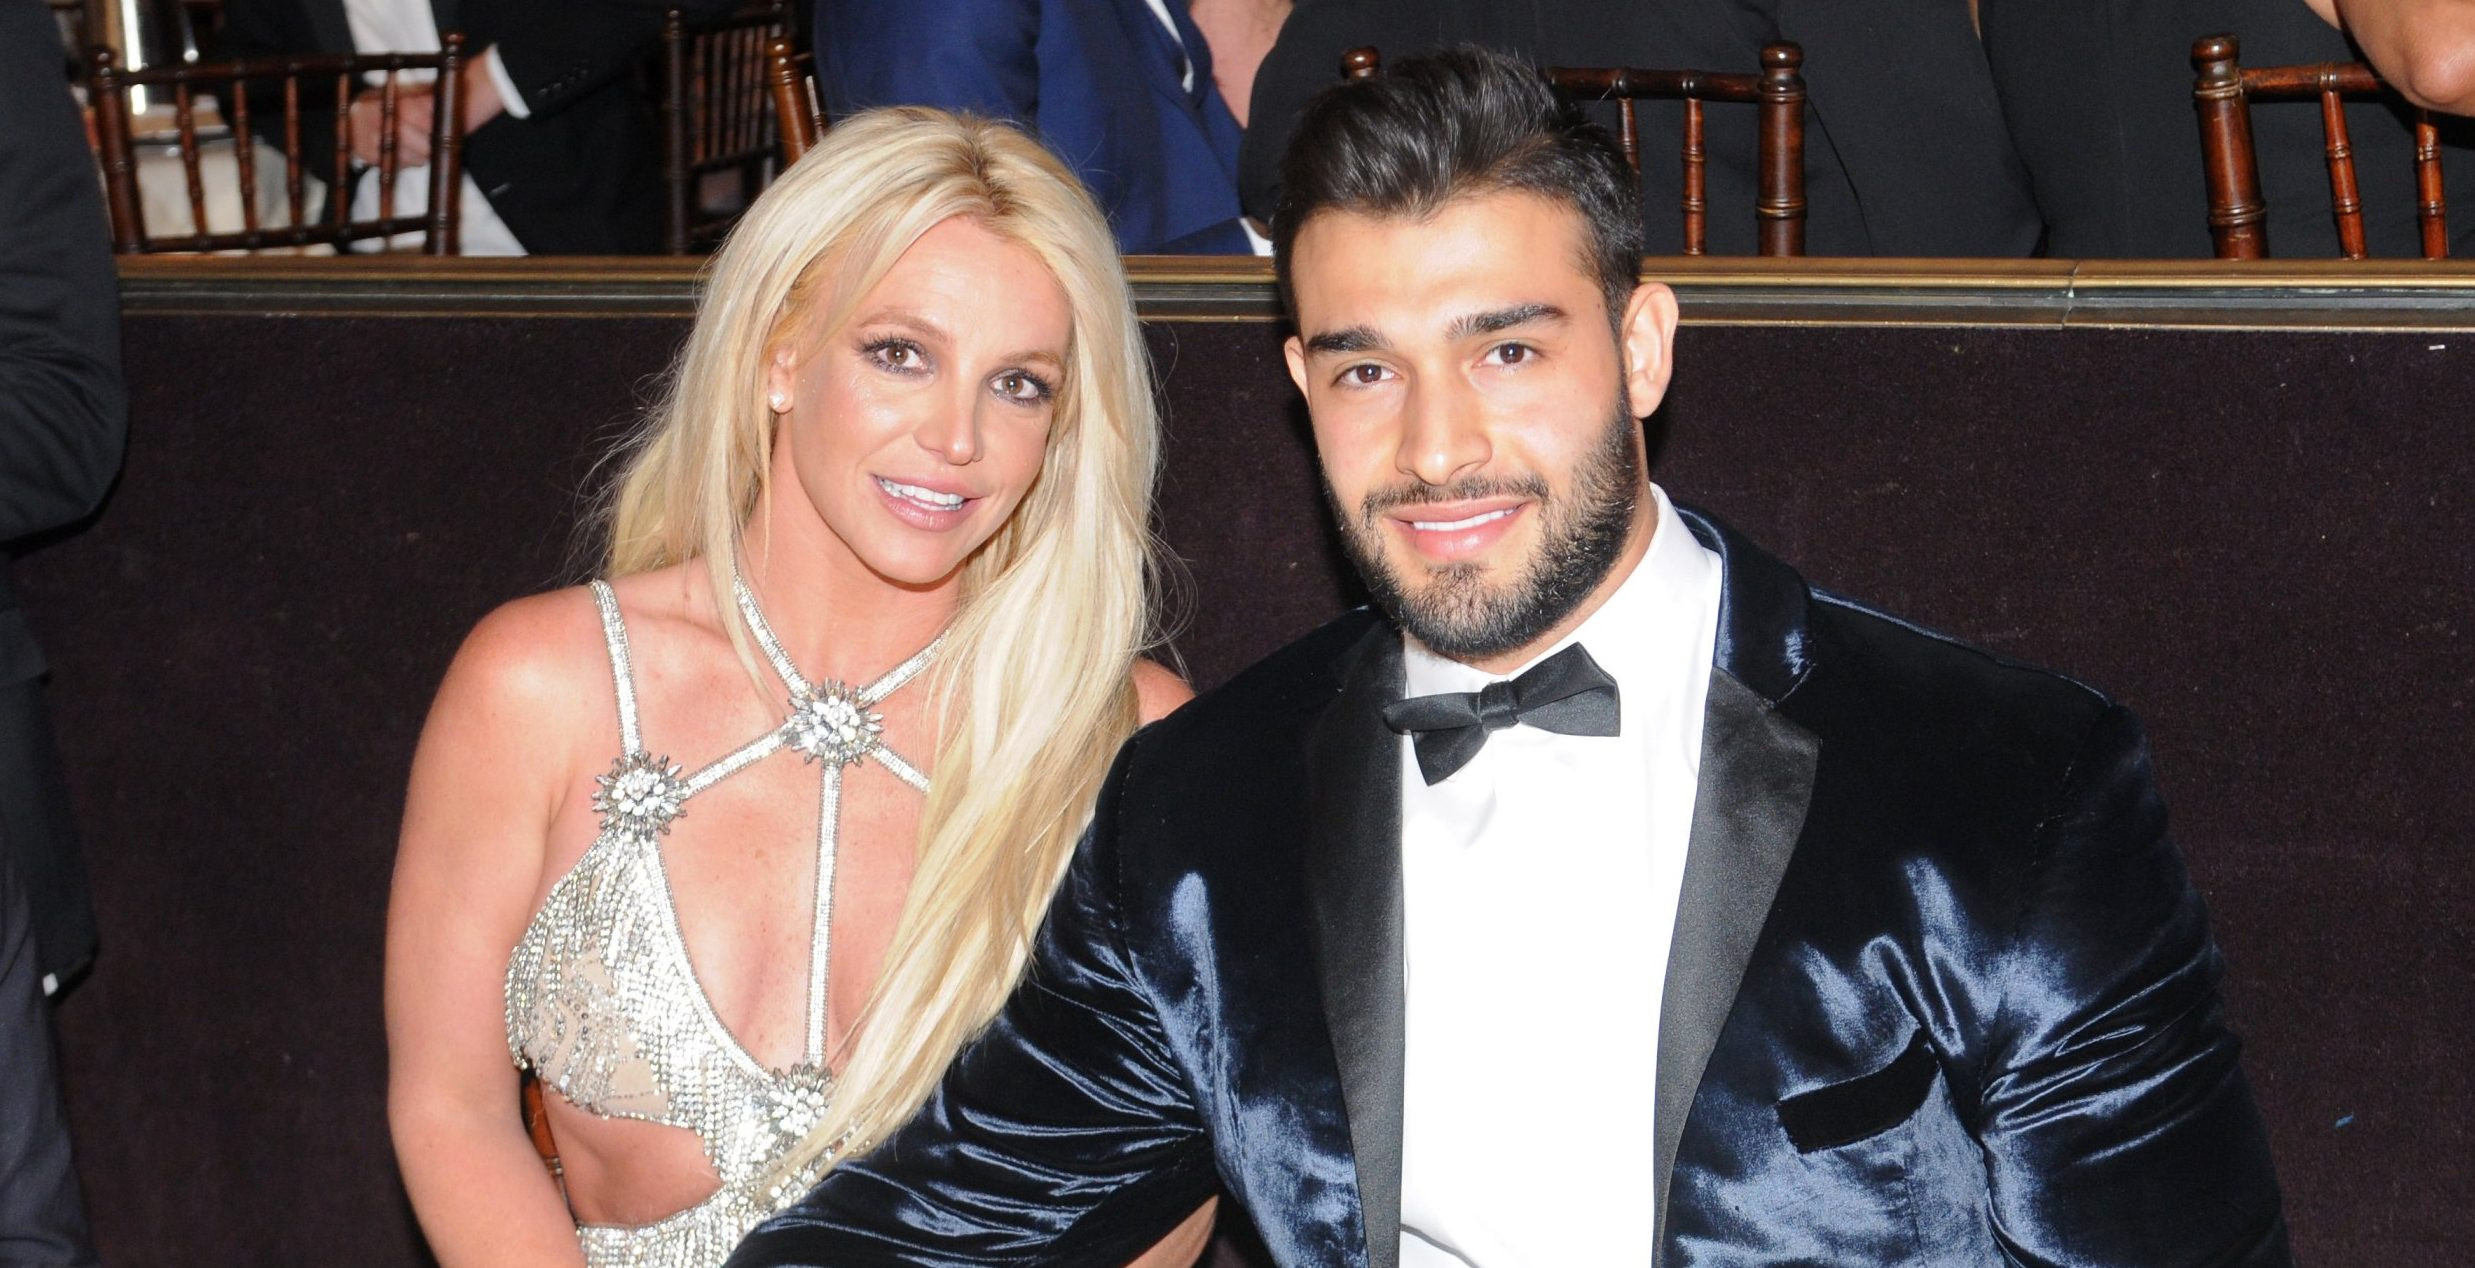 Britney Spears says conservatorship ‘won’t allow her to remove IUD’ to have baby with boyfriend Sam Asghari